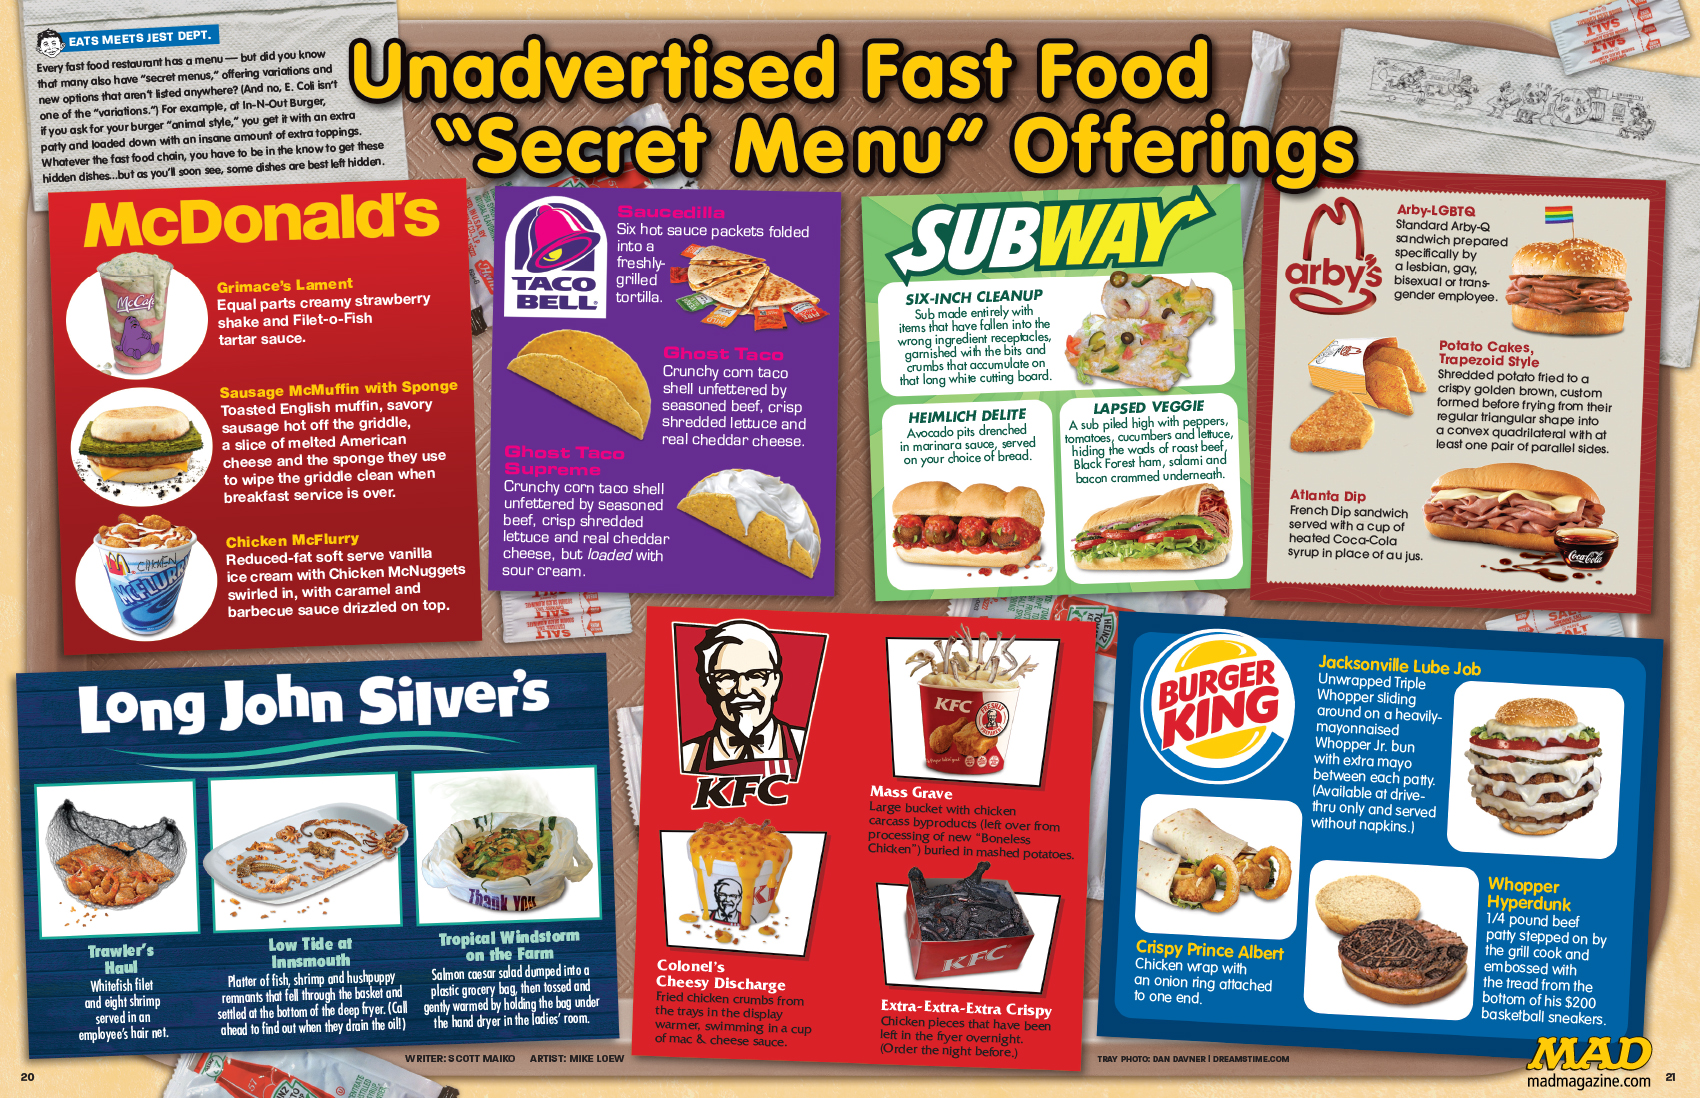 Mad's hard-hitting report on heretofore unknown secret menu items. Click to enlarge image.